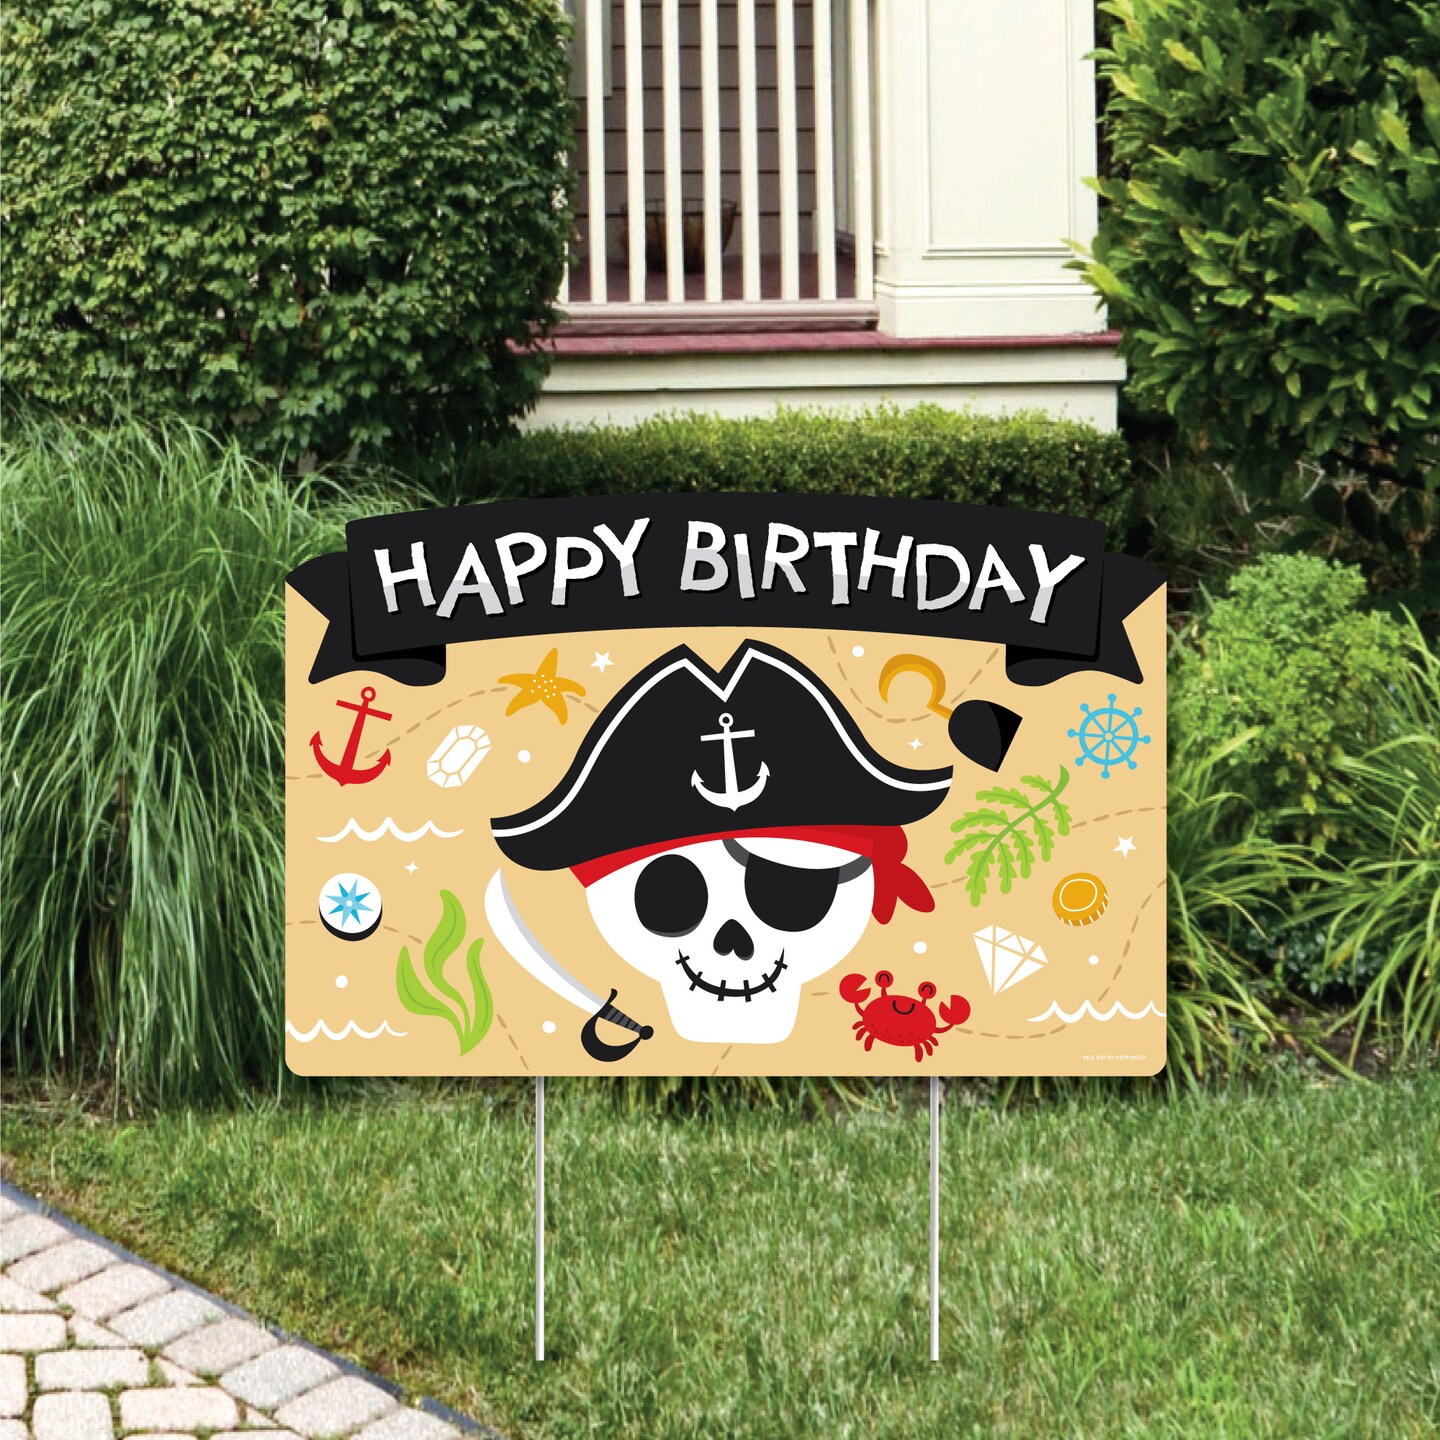 Big Dot of Happiness Pirate Ship Adventures - Skull Birthday Party Yard Sign Lawn Decorations - Happy Birthday Party Yardy Sign